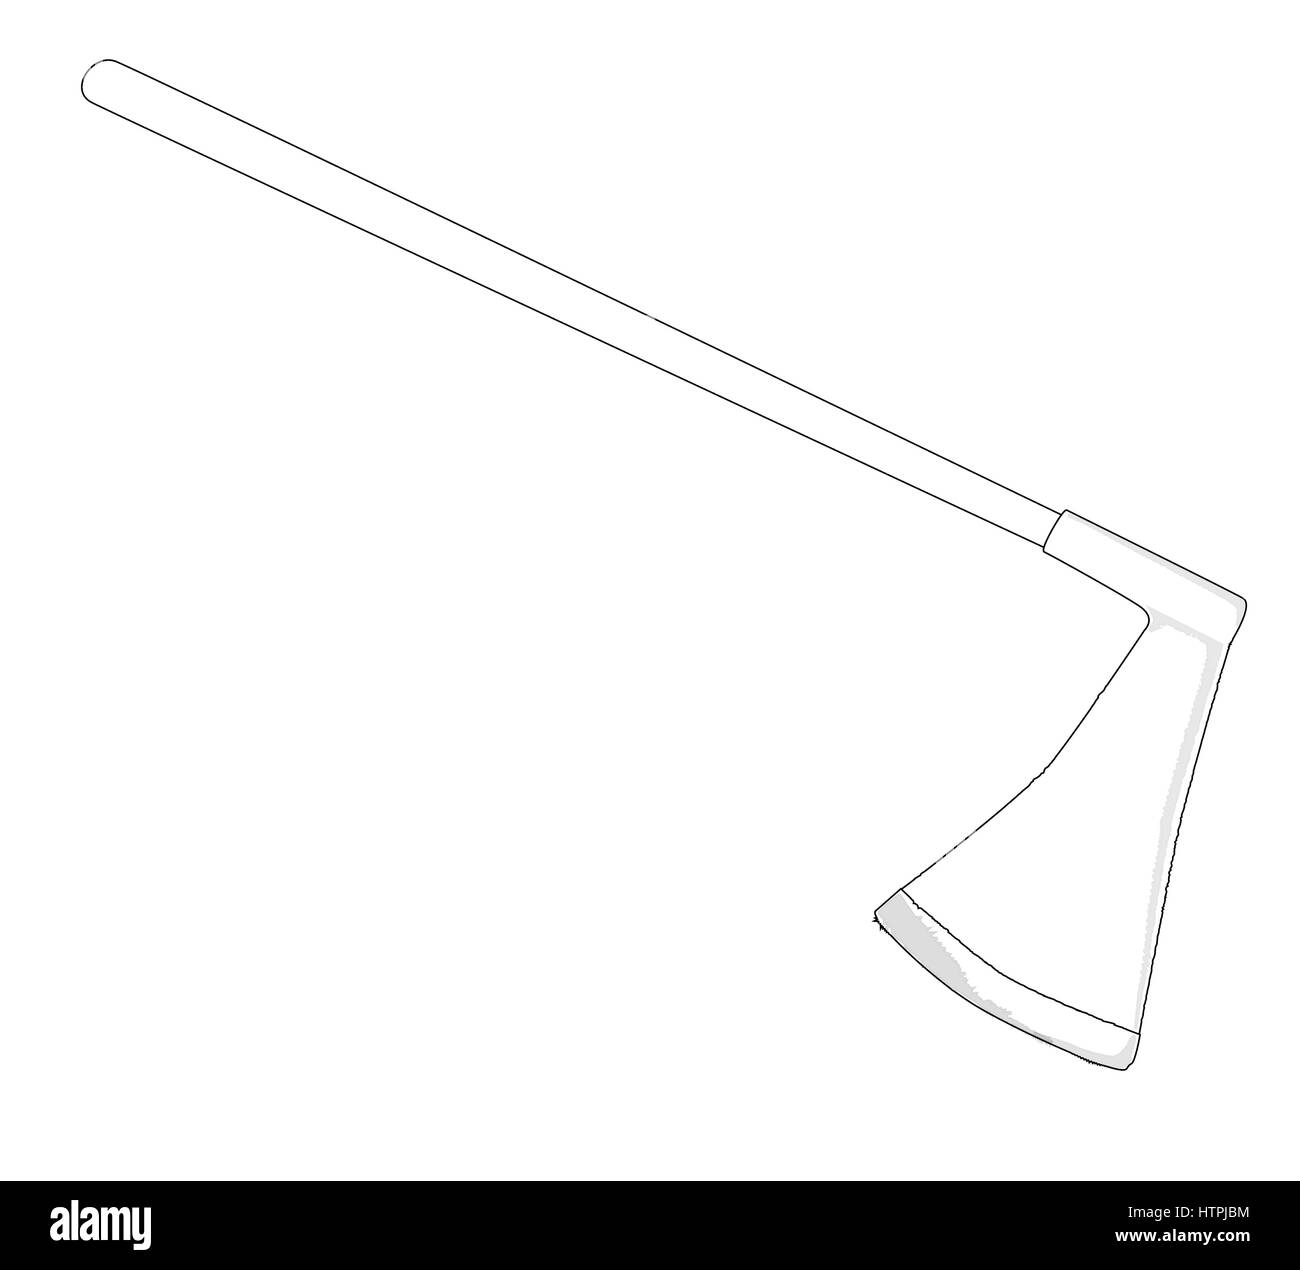 A medievil style executioners axe in outline over a white background Stock Vector